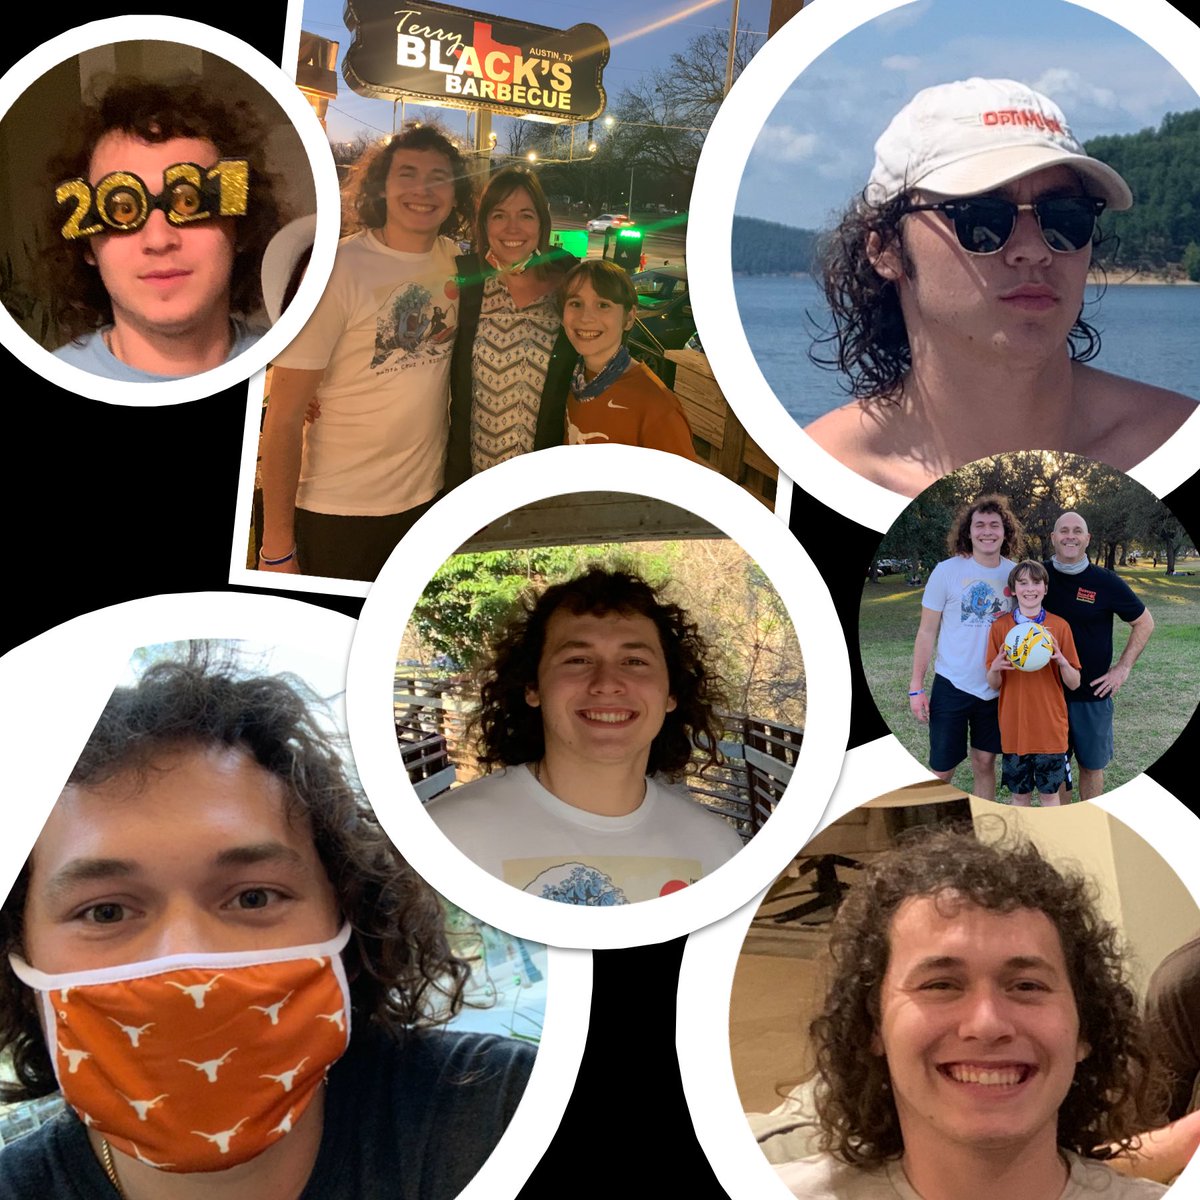 Happy 20th @ianhenigan 🤩You are a wonderful son and person. I’m so proud of who you are.💗It was awesome to hang out with you in Austin and during the playoffs this year! #20sRock #SoYouSayItsYourBirthday